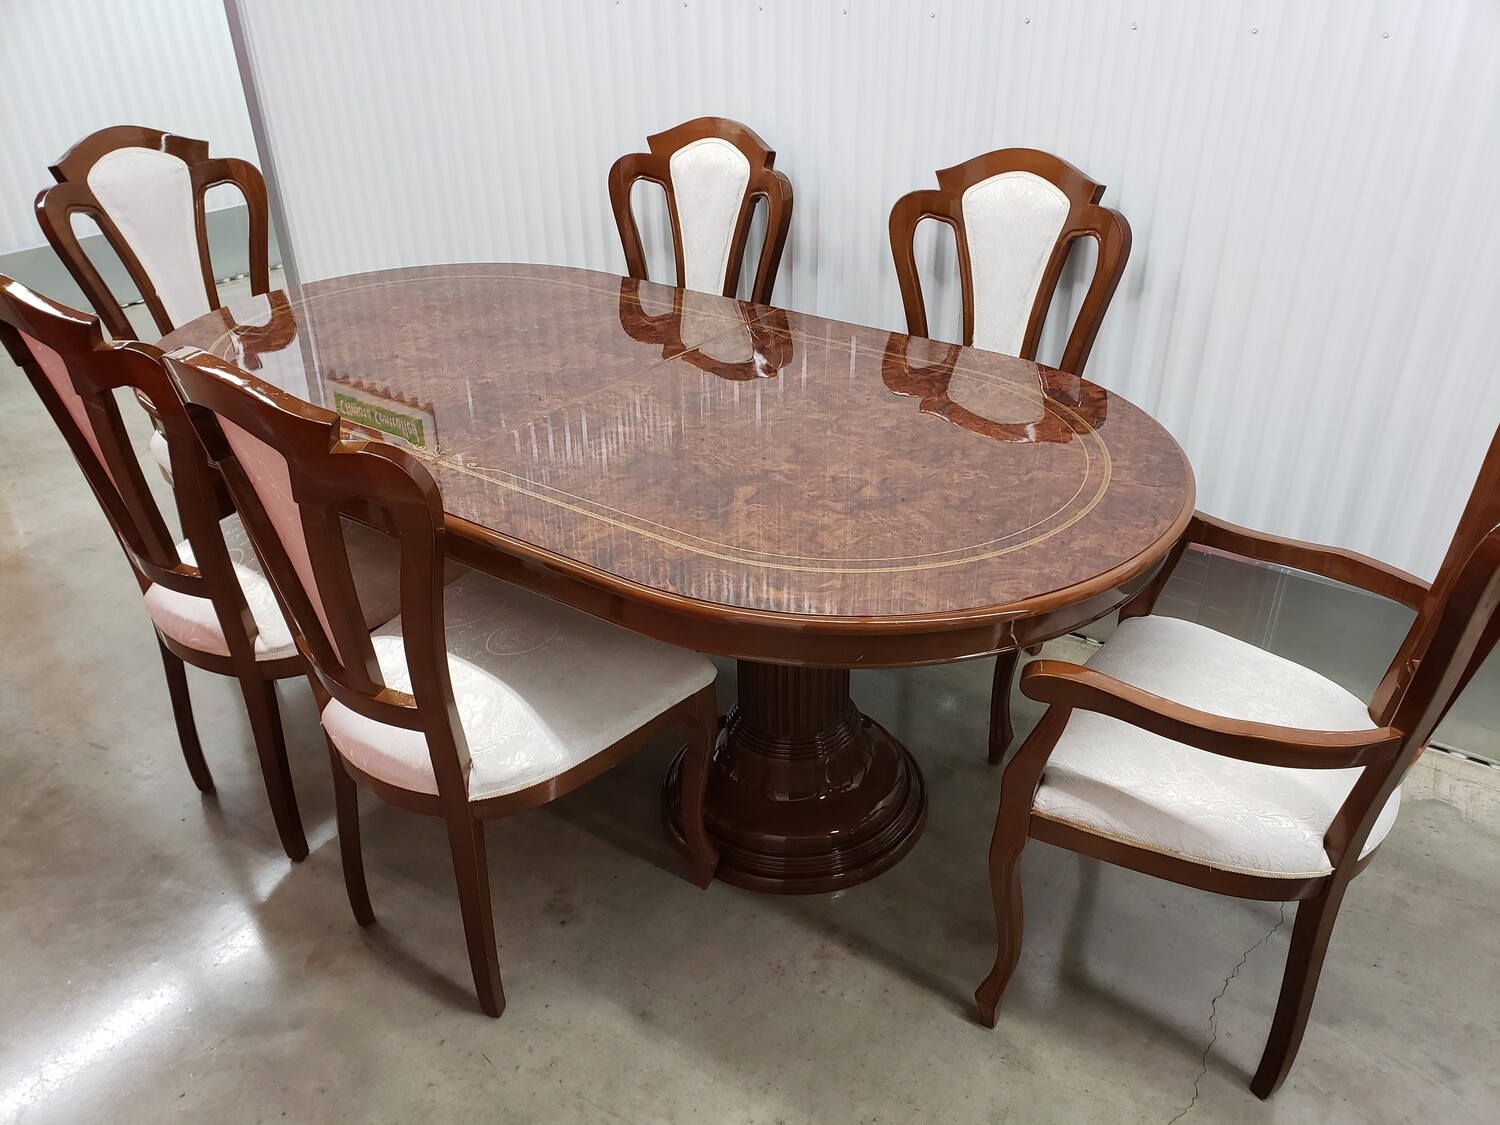 FREE - PICK UP BY SAT. 6/25 - Dining table, 6 Chairs, resin? material #2324